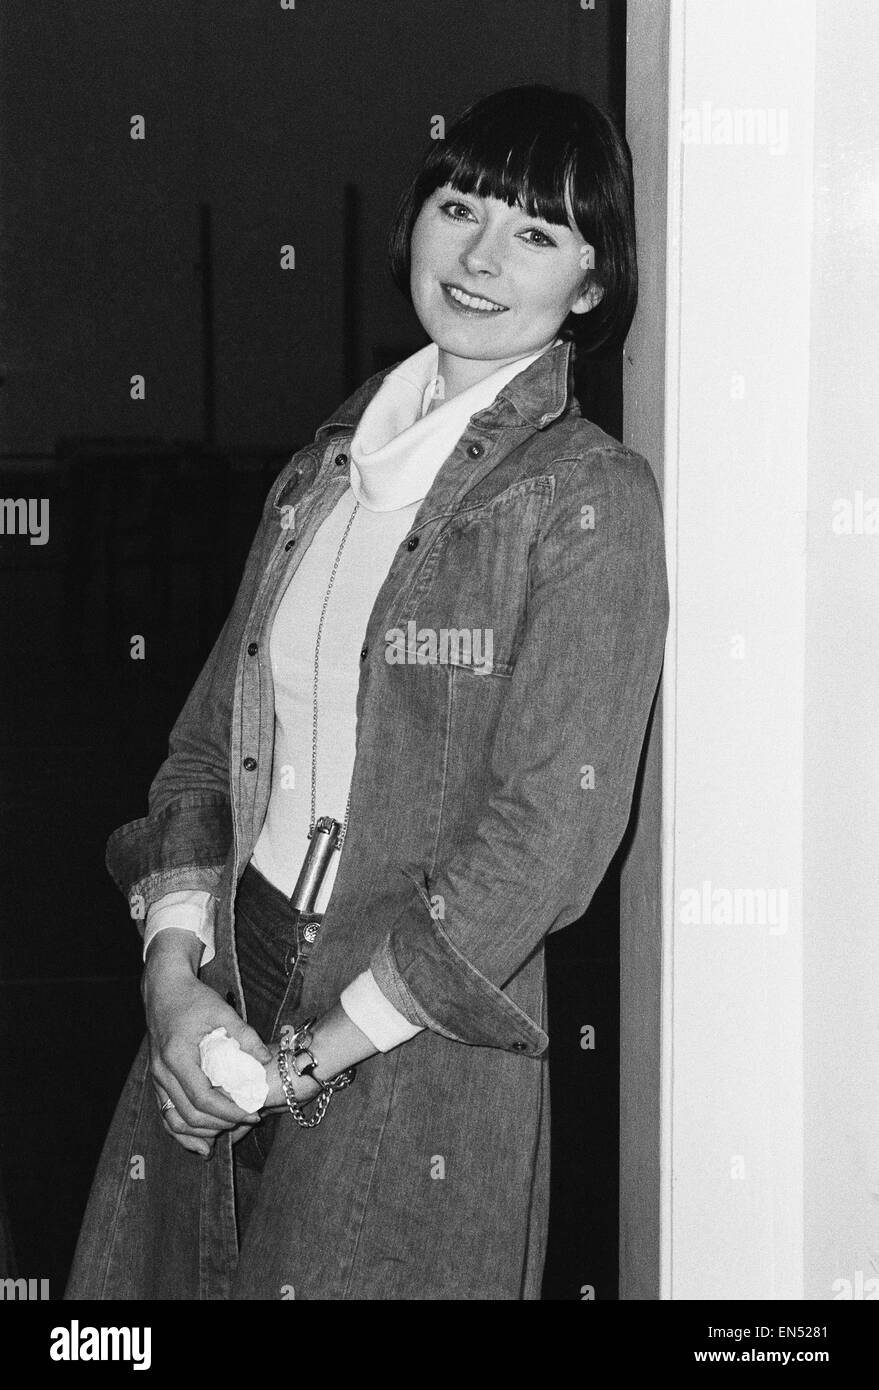 Rehearsal for the new London Weekend television drama series 'Love for Lydia'. Mel Martin who plays the role of Lydia. 16th December 1976. Stock Photo